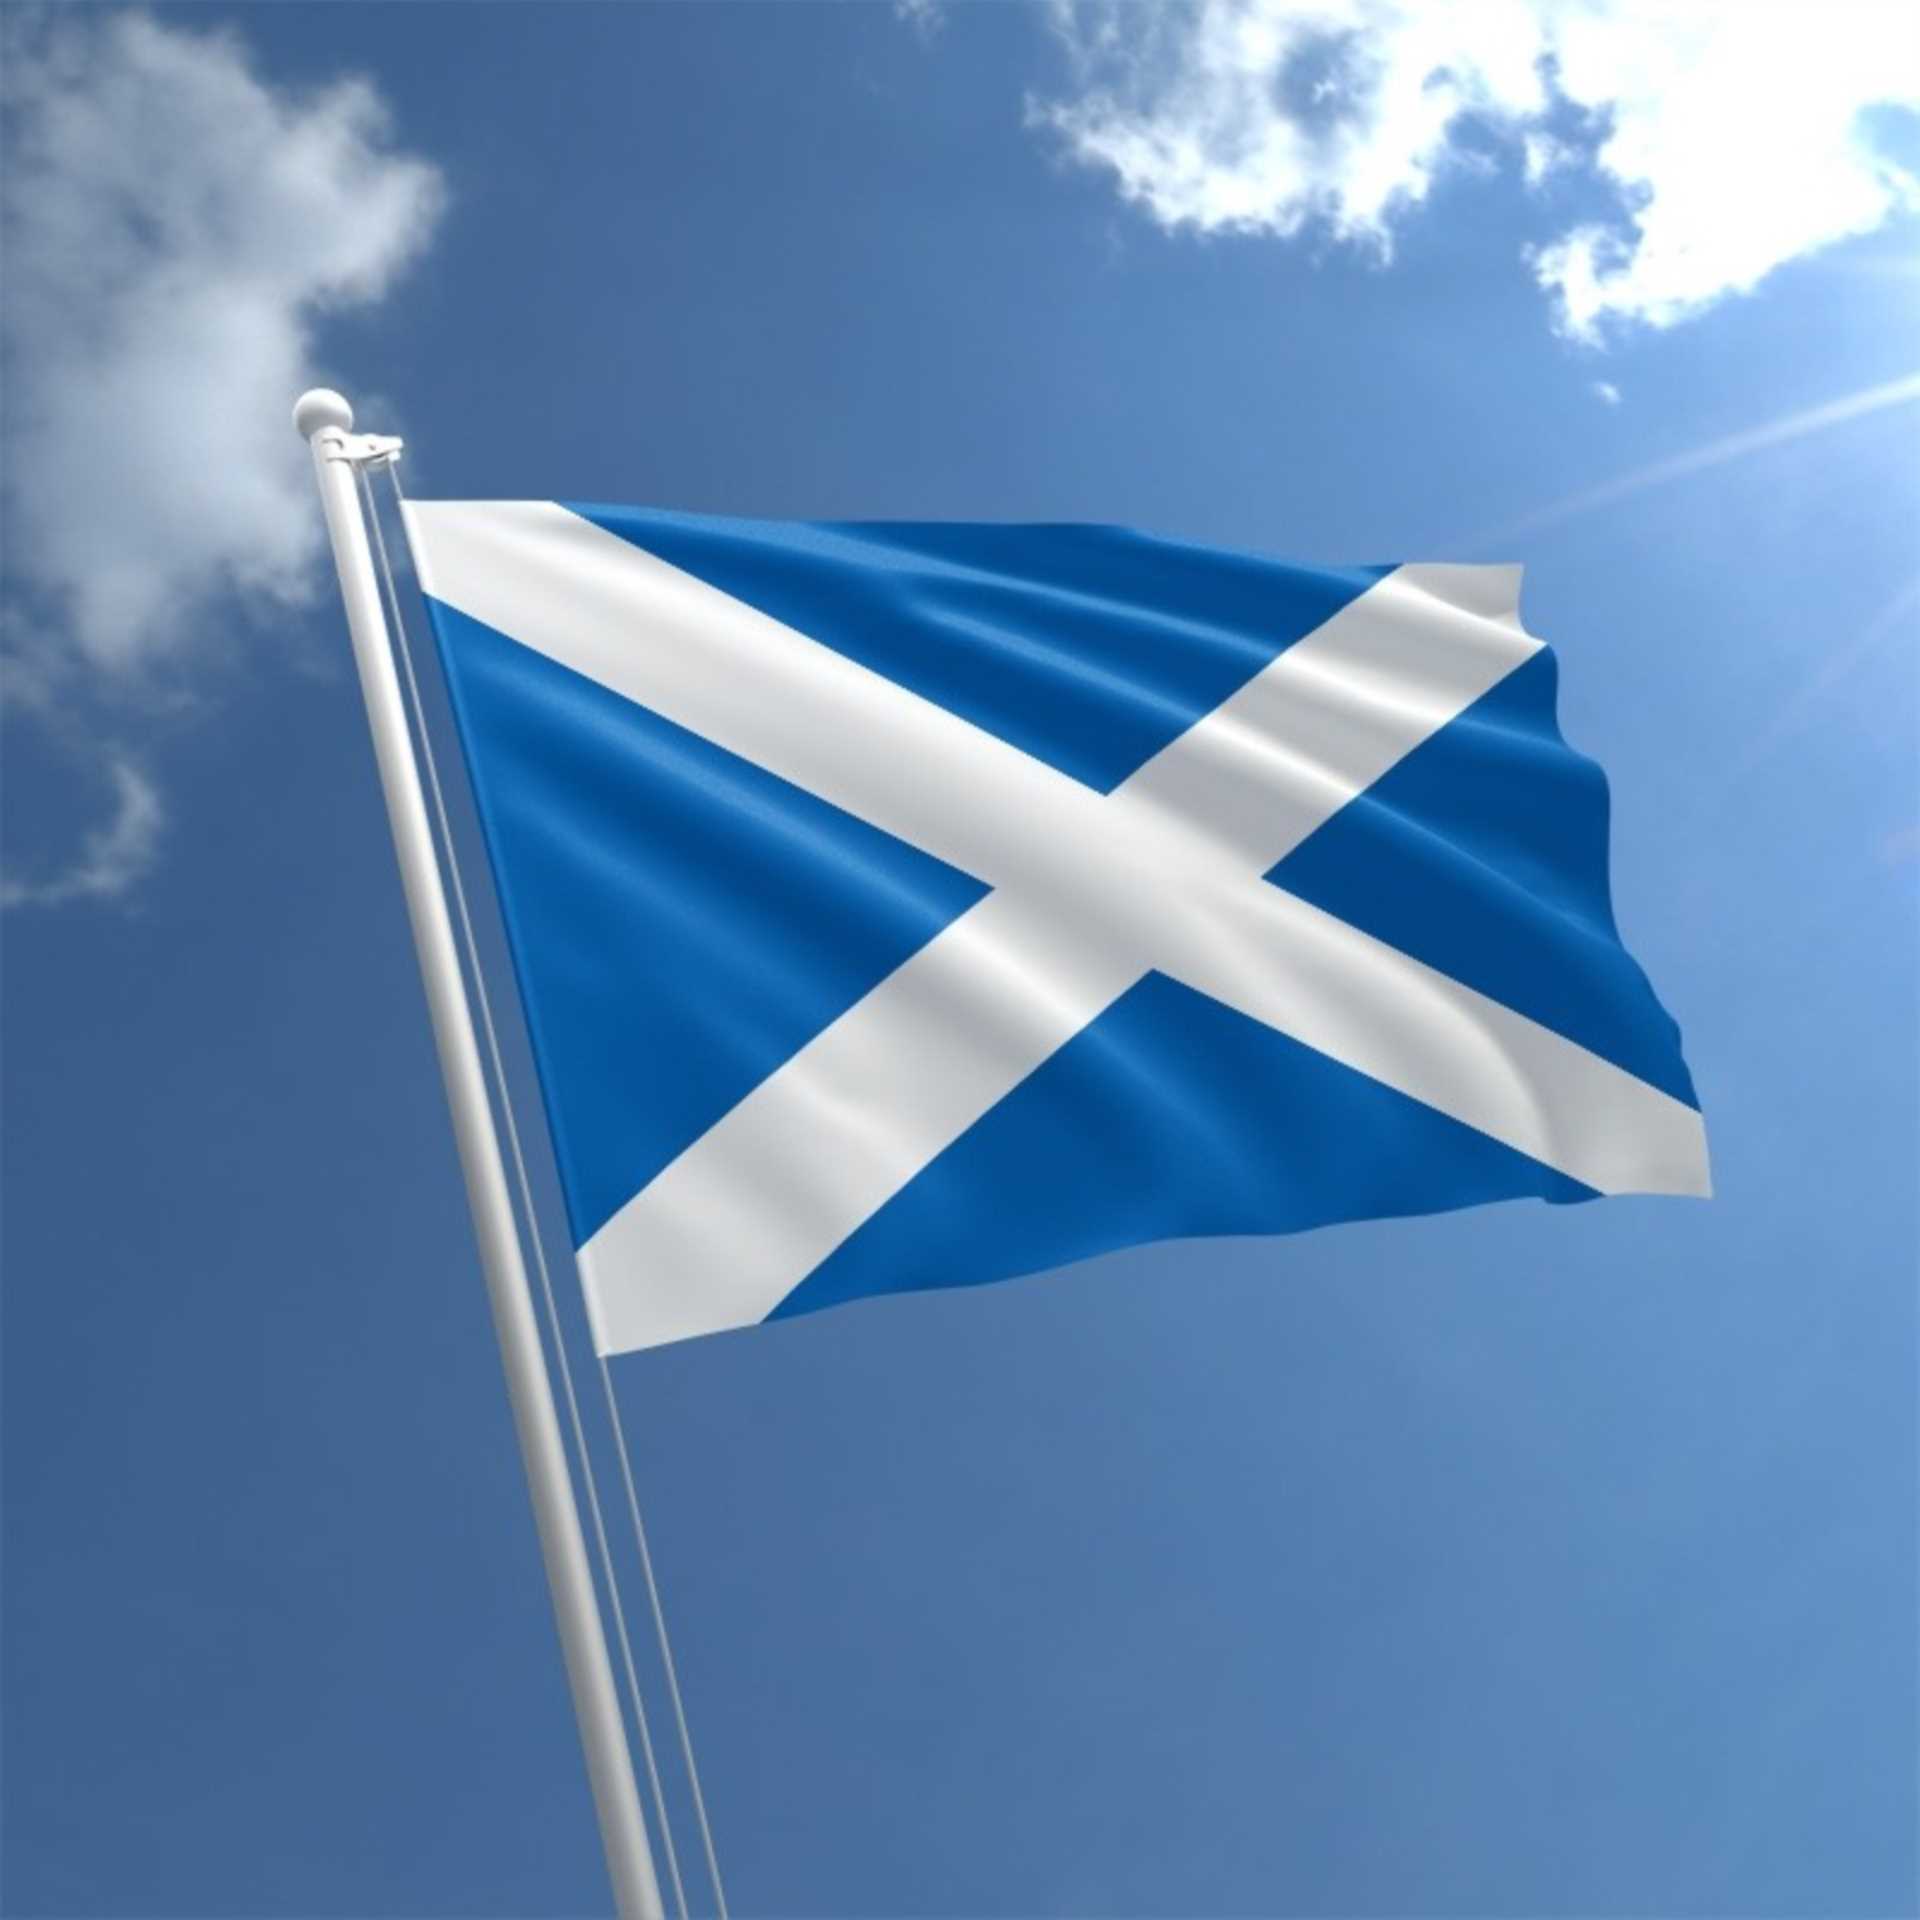 AST abolished in Scotland, will England follow soon?